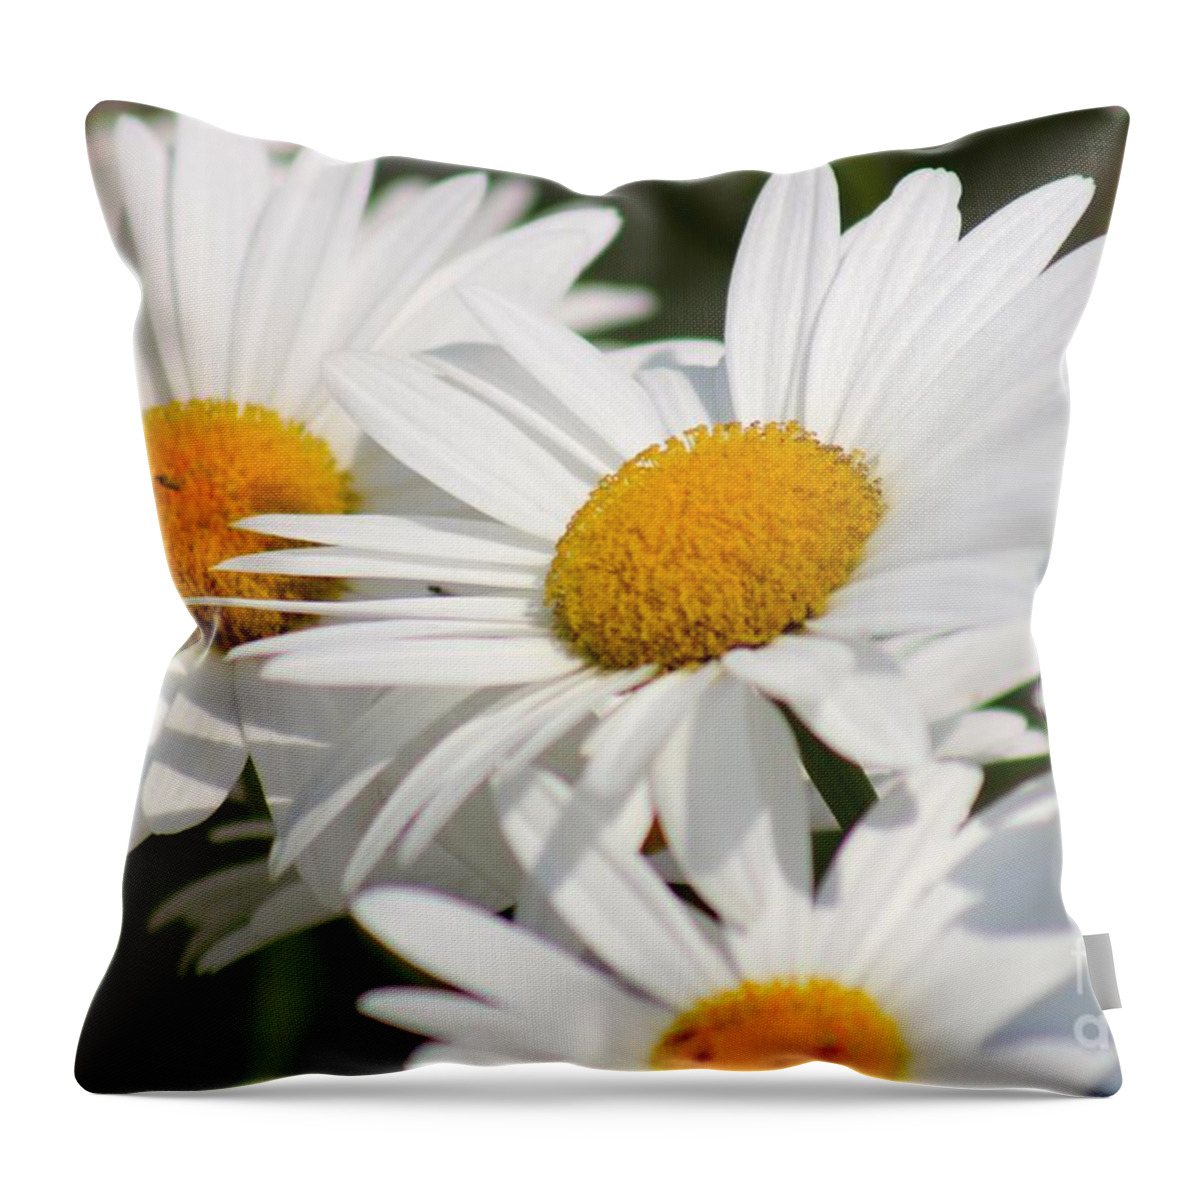 Yellow Throw Pillow featuring the photograph Nature's Beauty 56 by Deena Withycombe